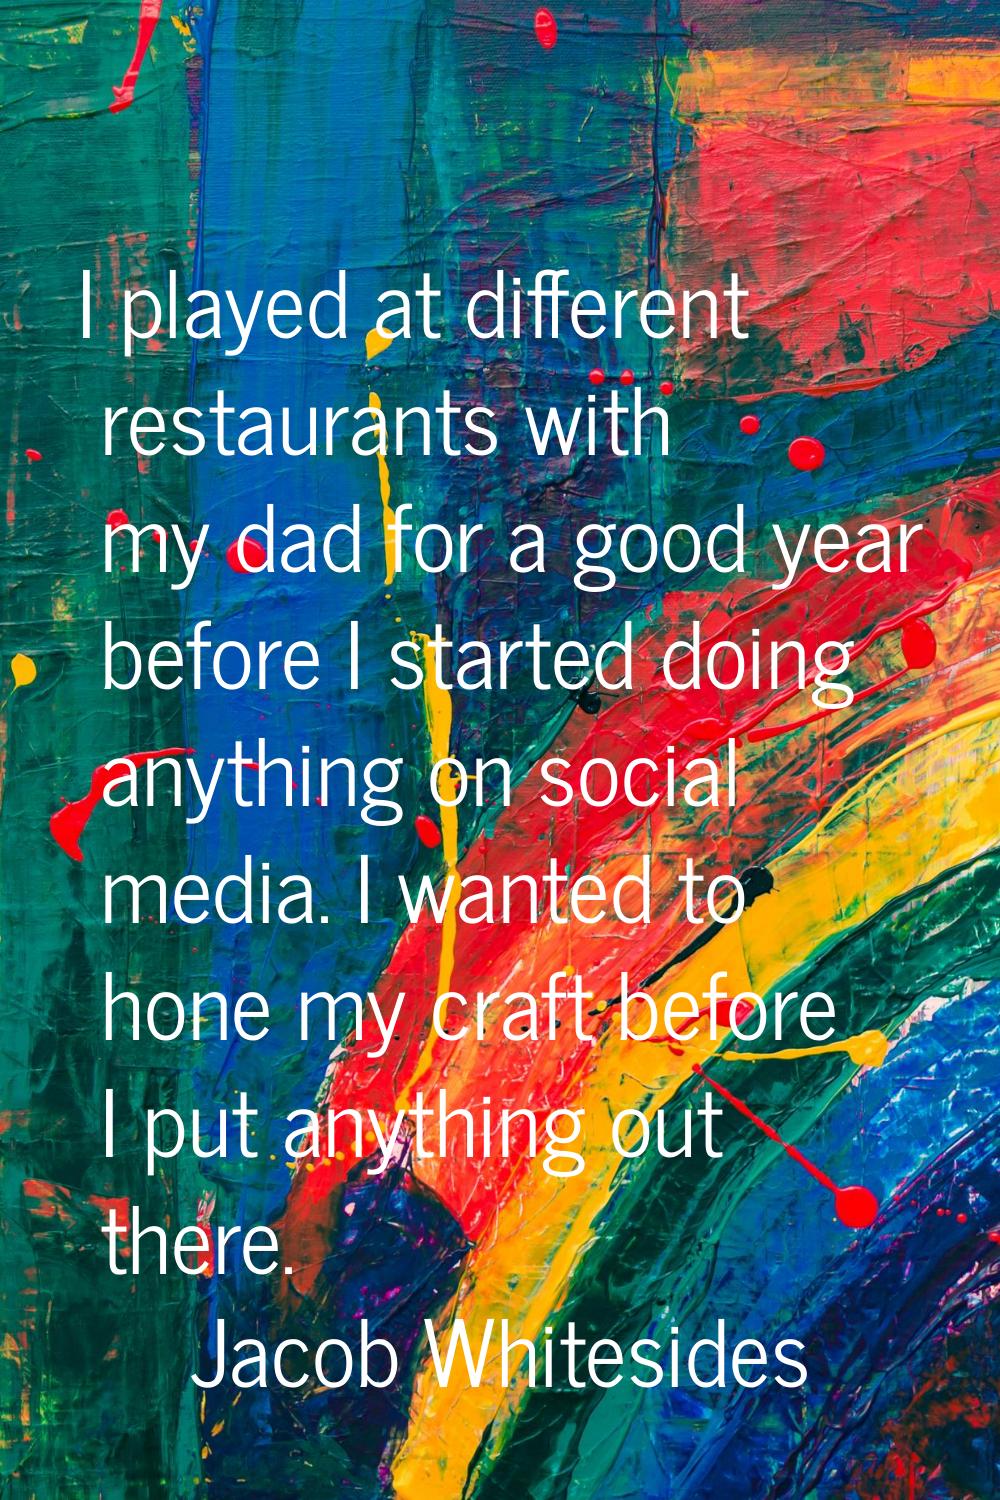 I played at different restaurants with my dad for a good year before I started doing anything on so